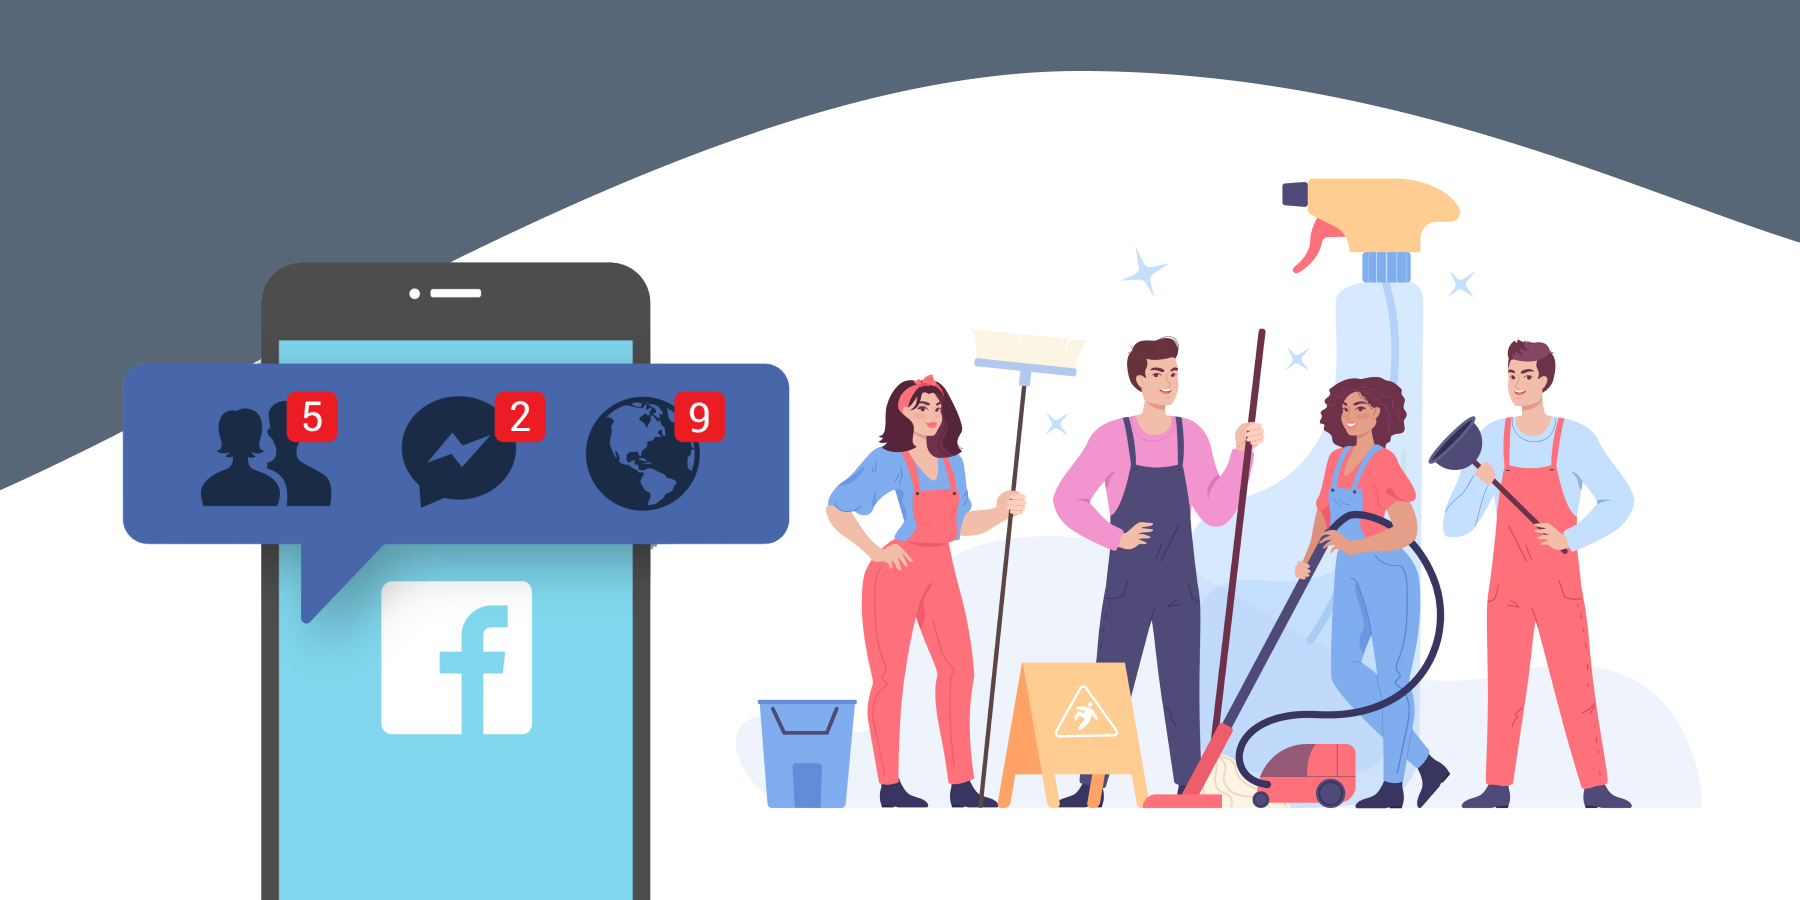 Illustration of Facebook app opened on mobile phone, highlighted is notification bar and illustration of cleaners and plumber. 